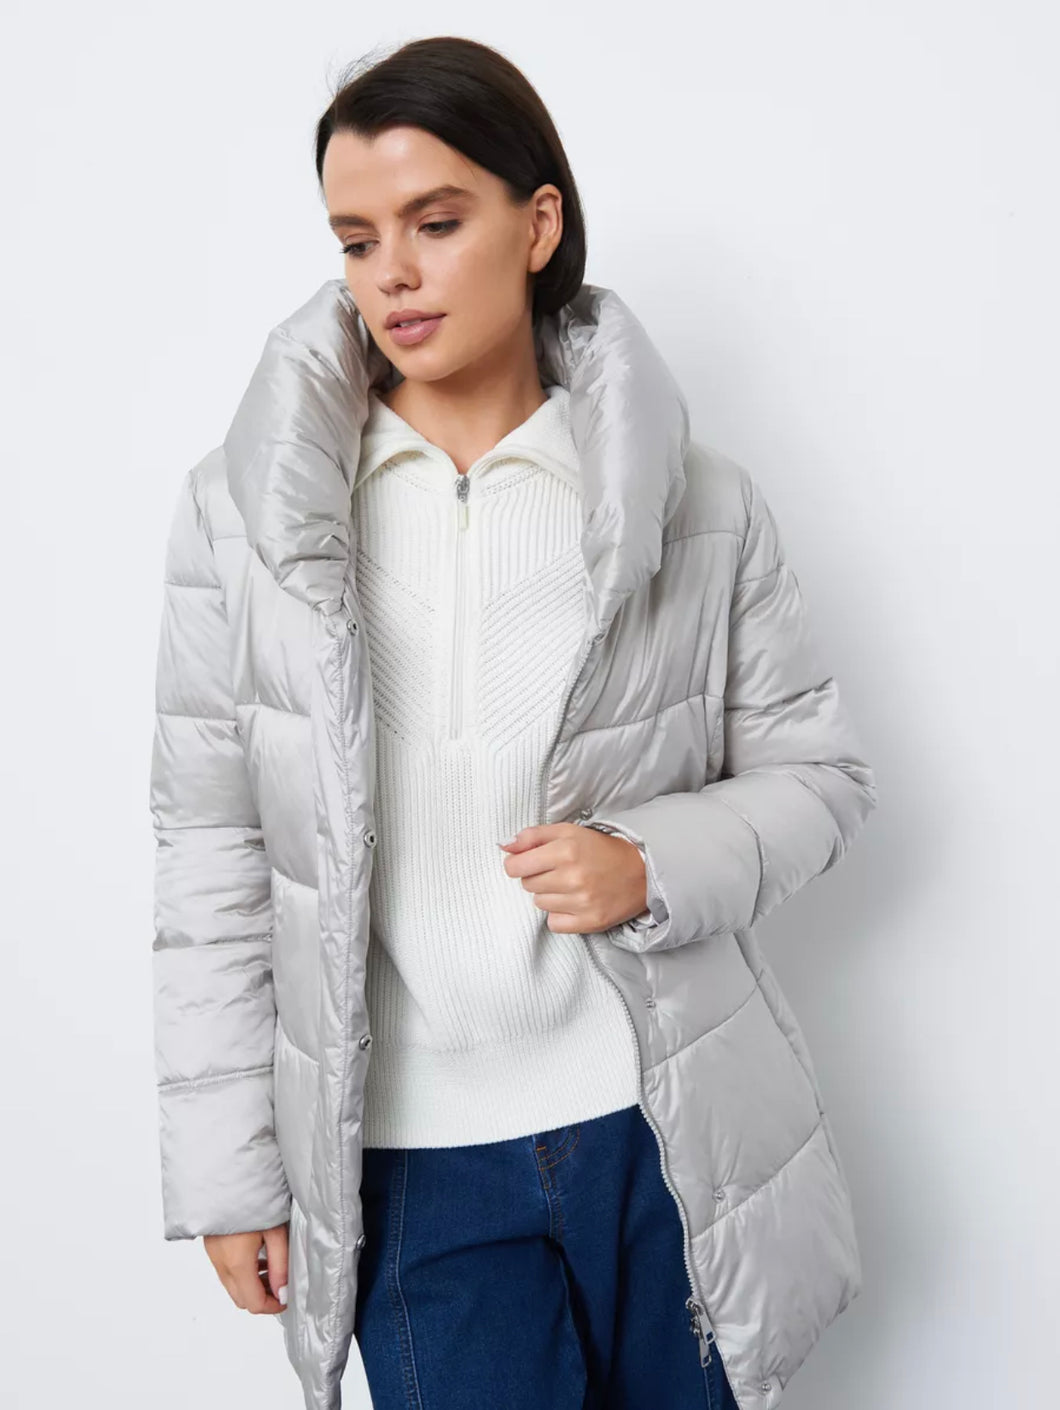 Quilted Coat